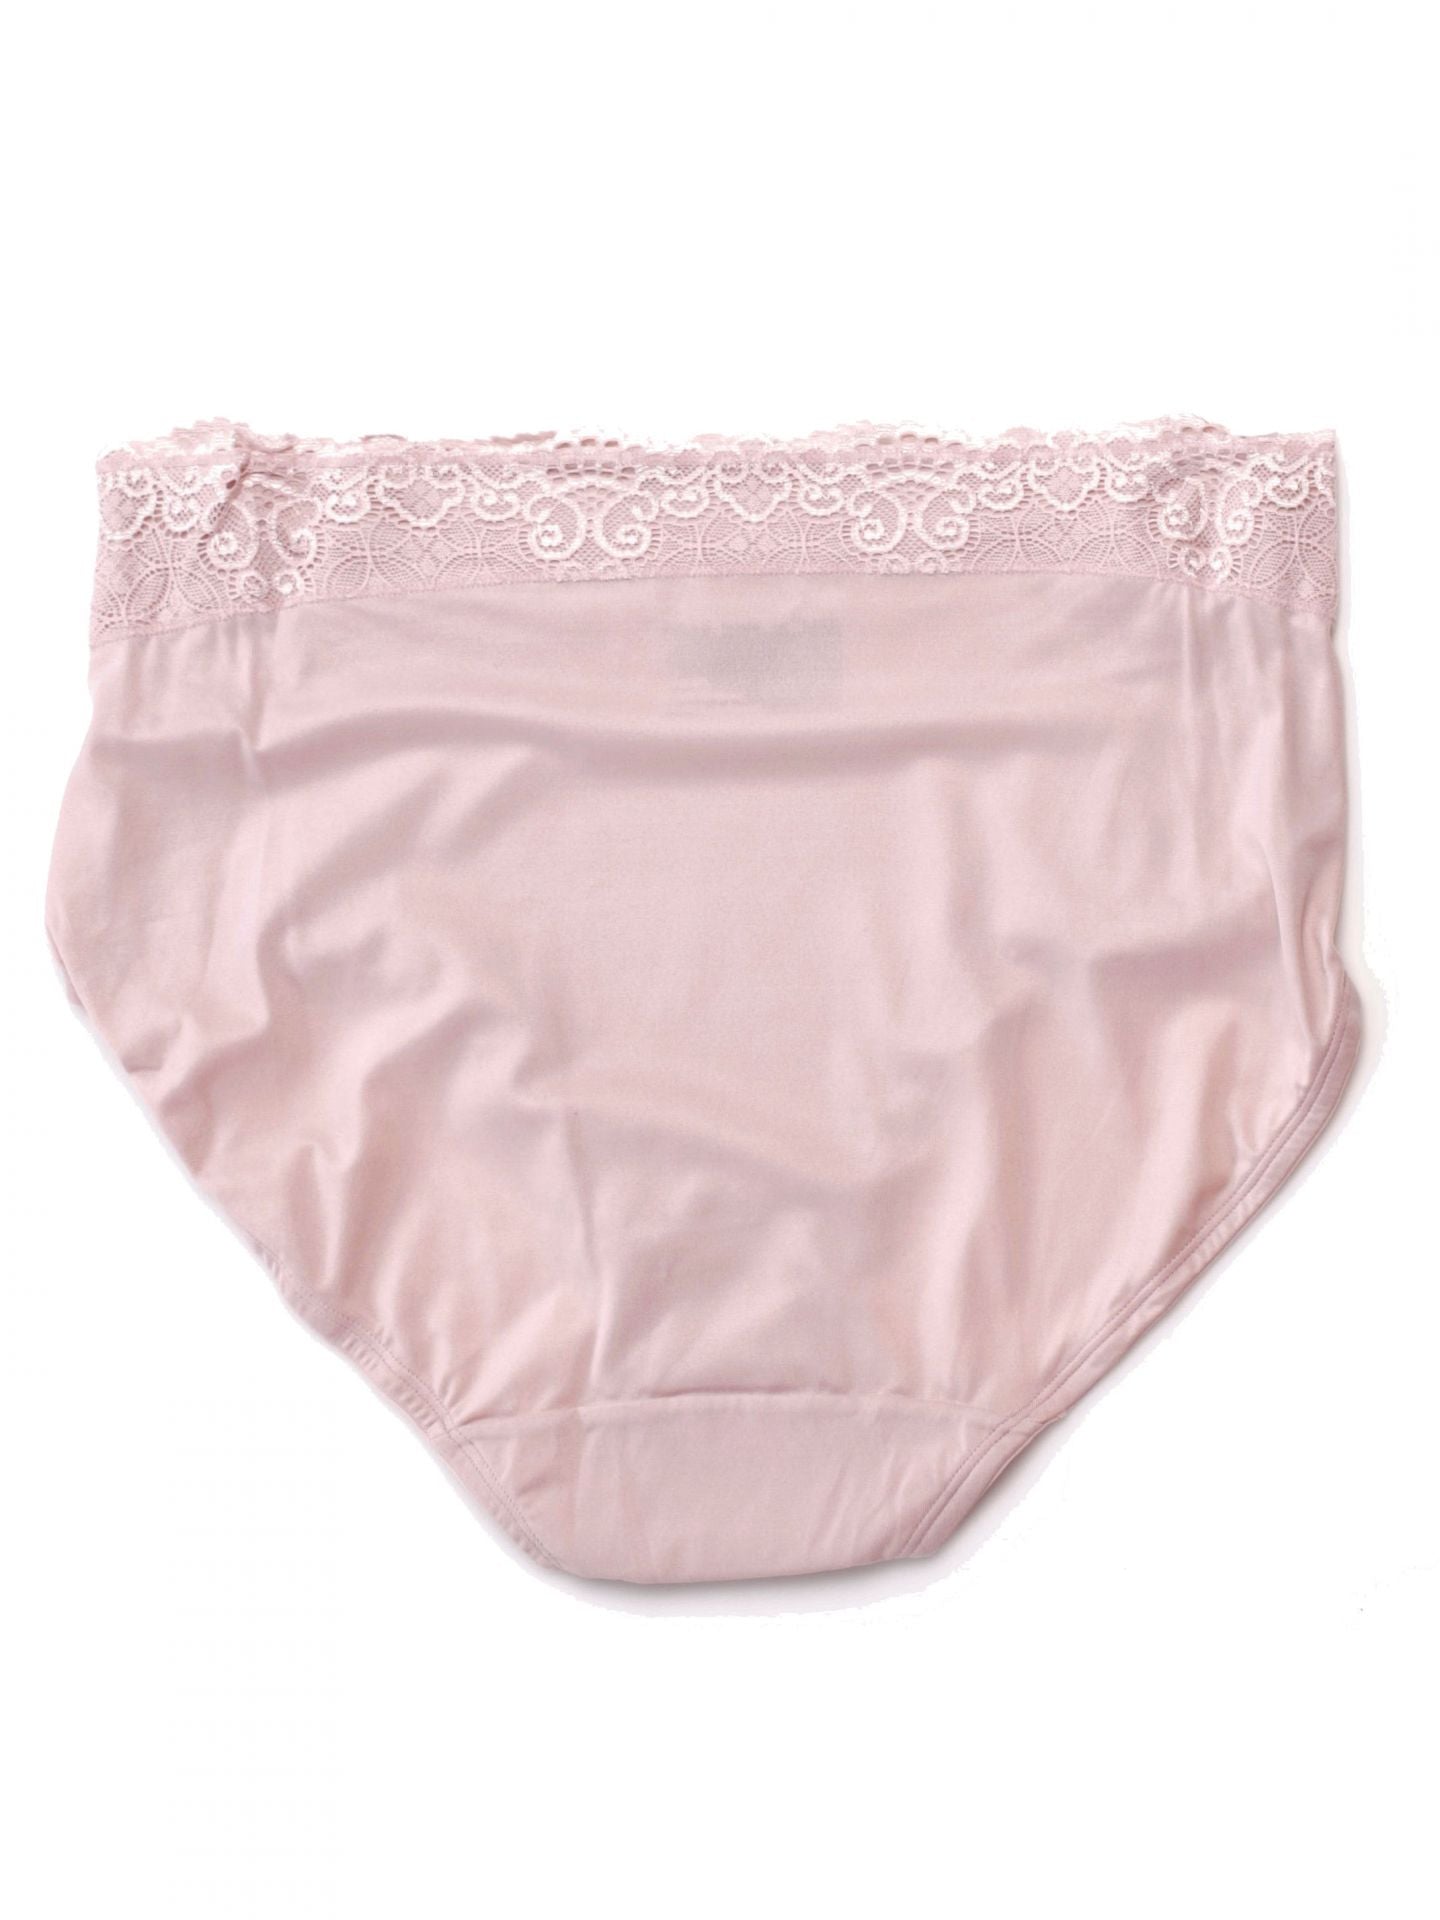 Women's Passion For Comfort Lace Brief